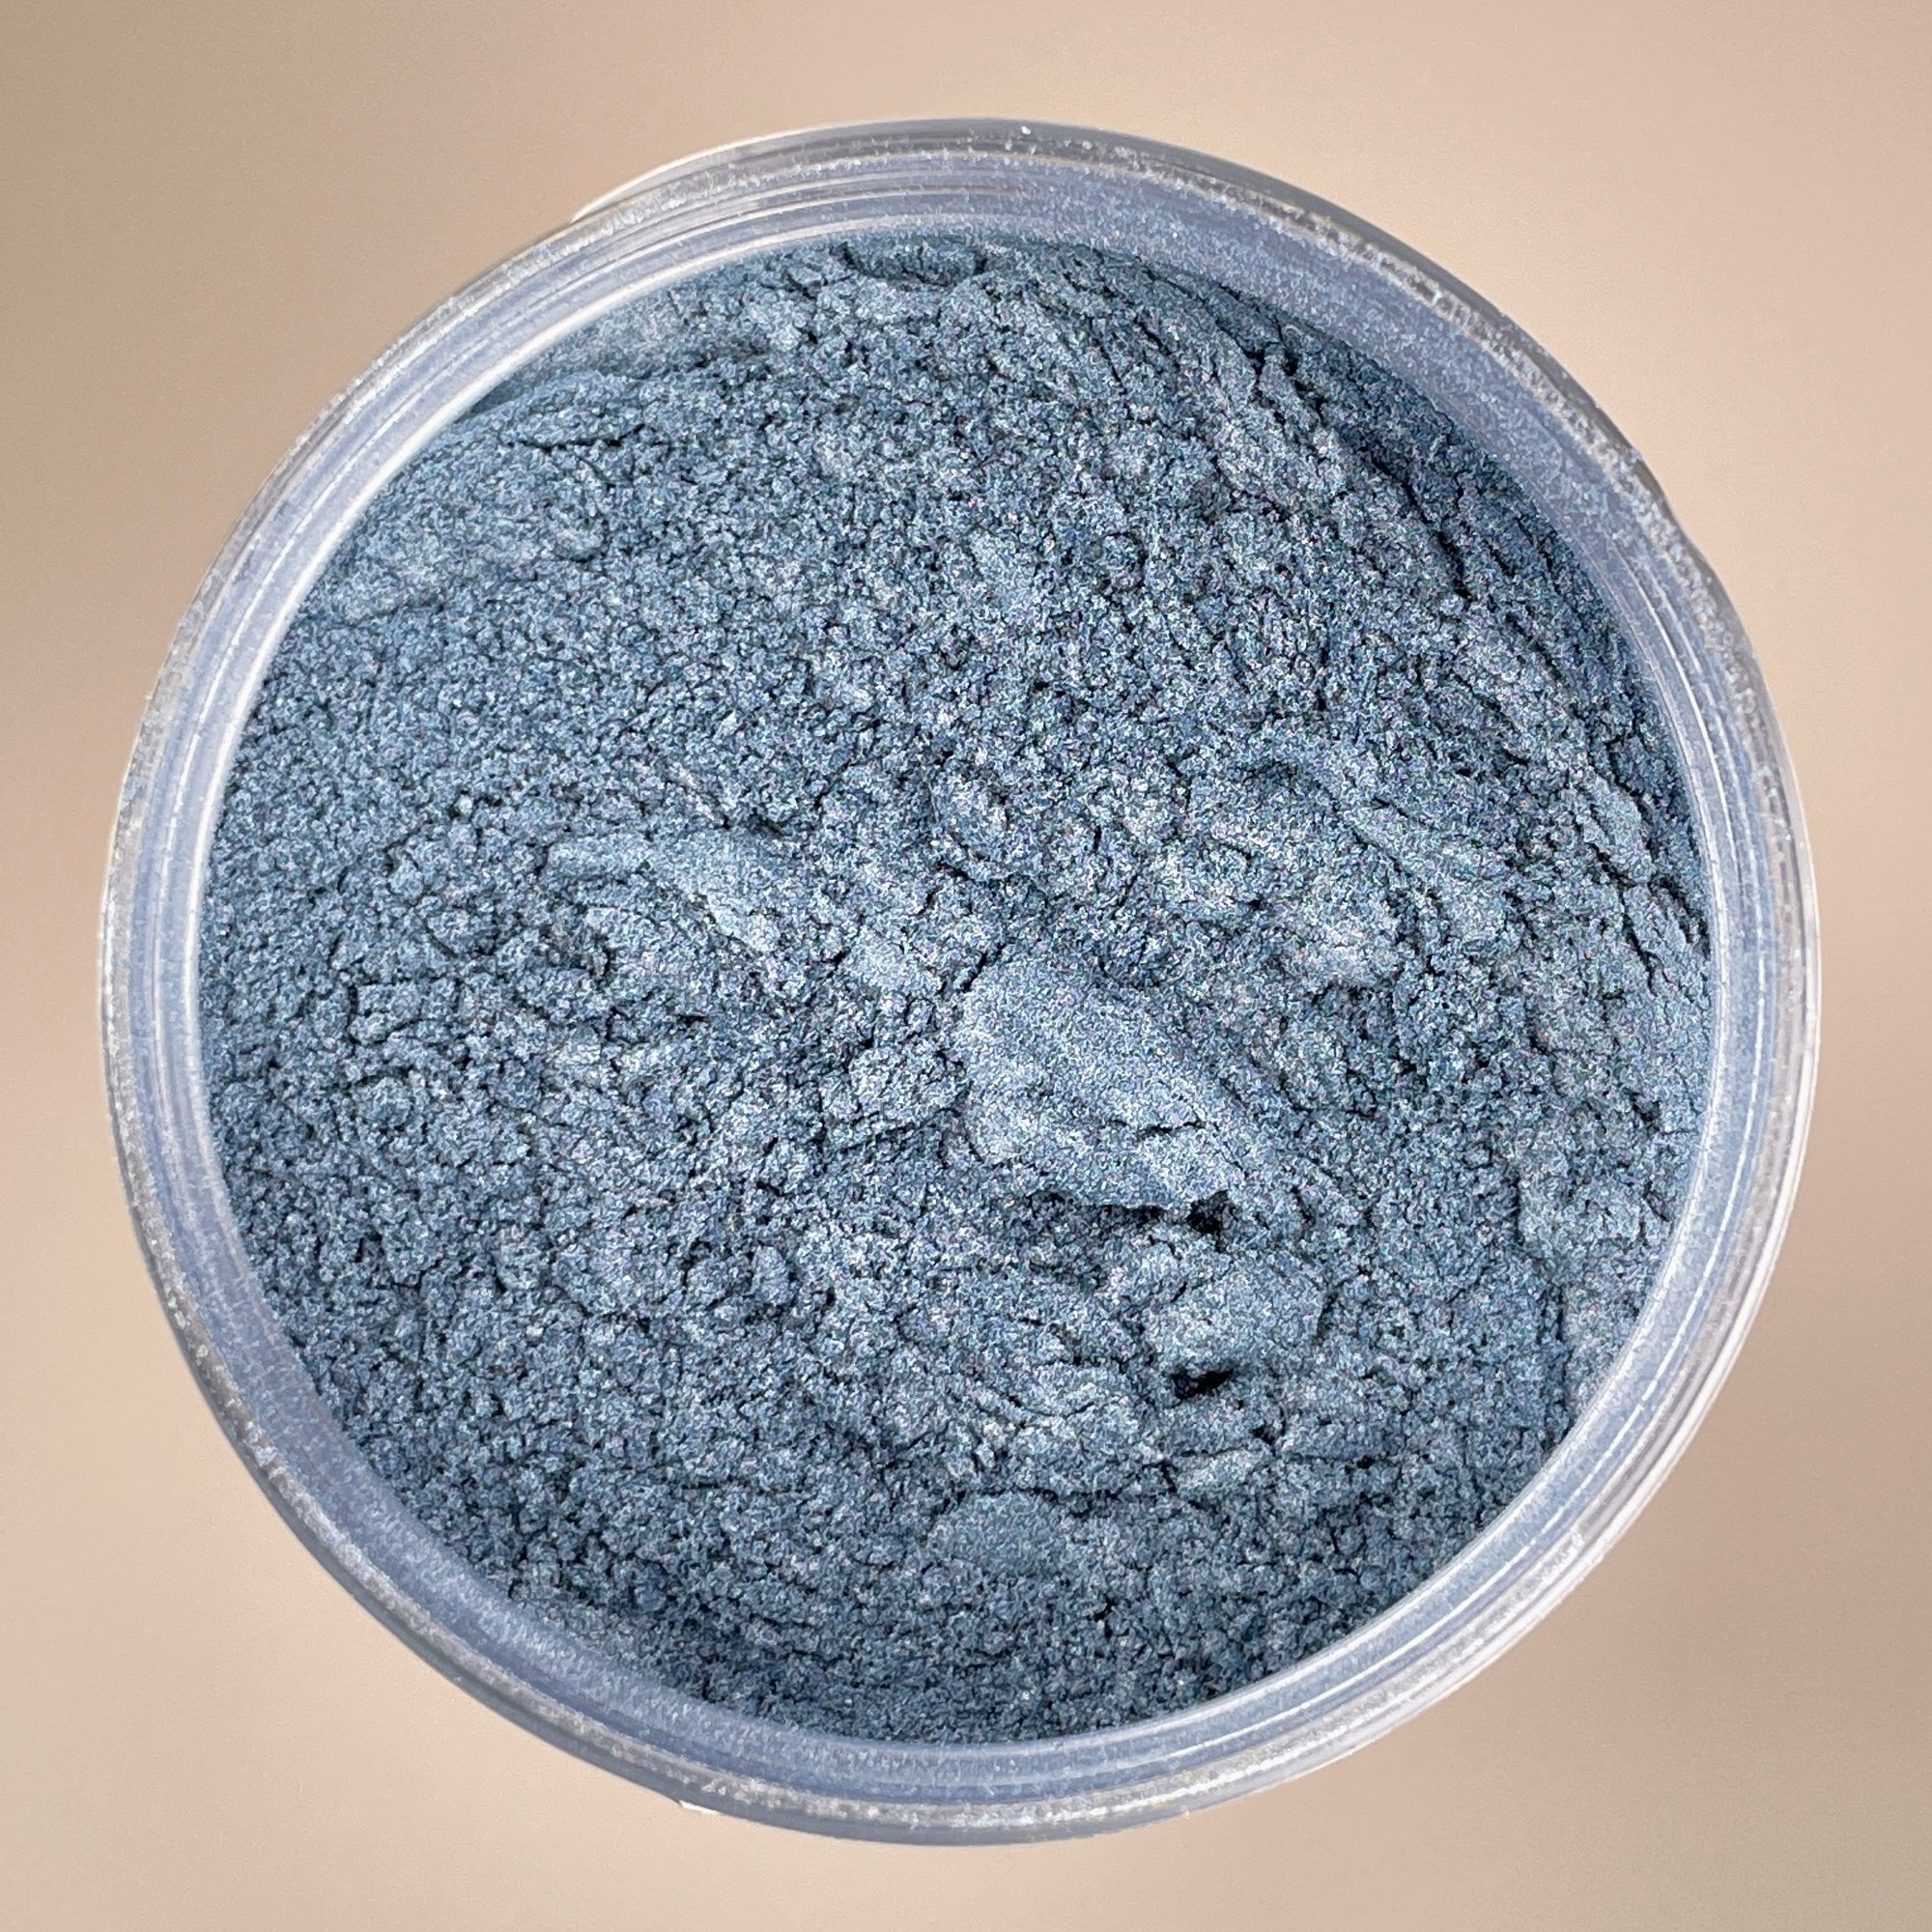 Radiant mica powder for nail art and decoration to give you a soft blue colour